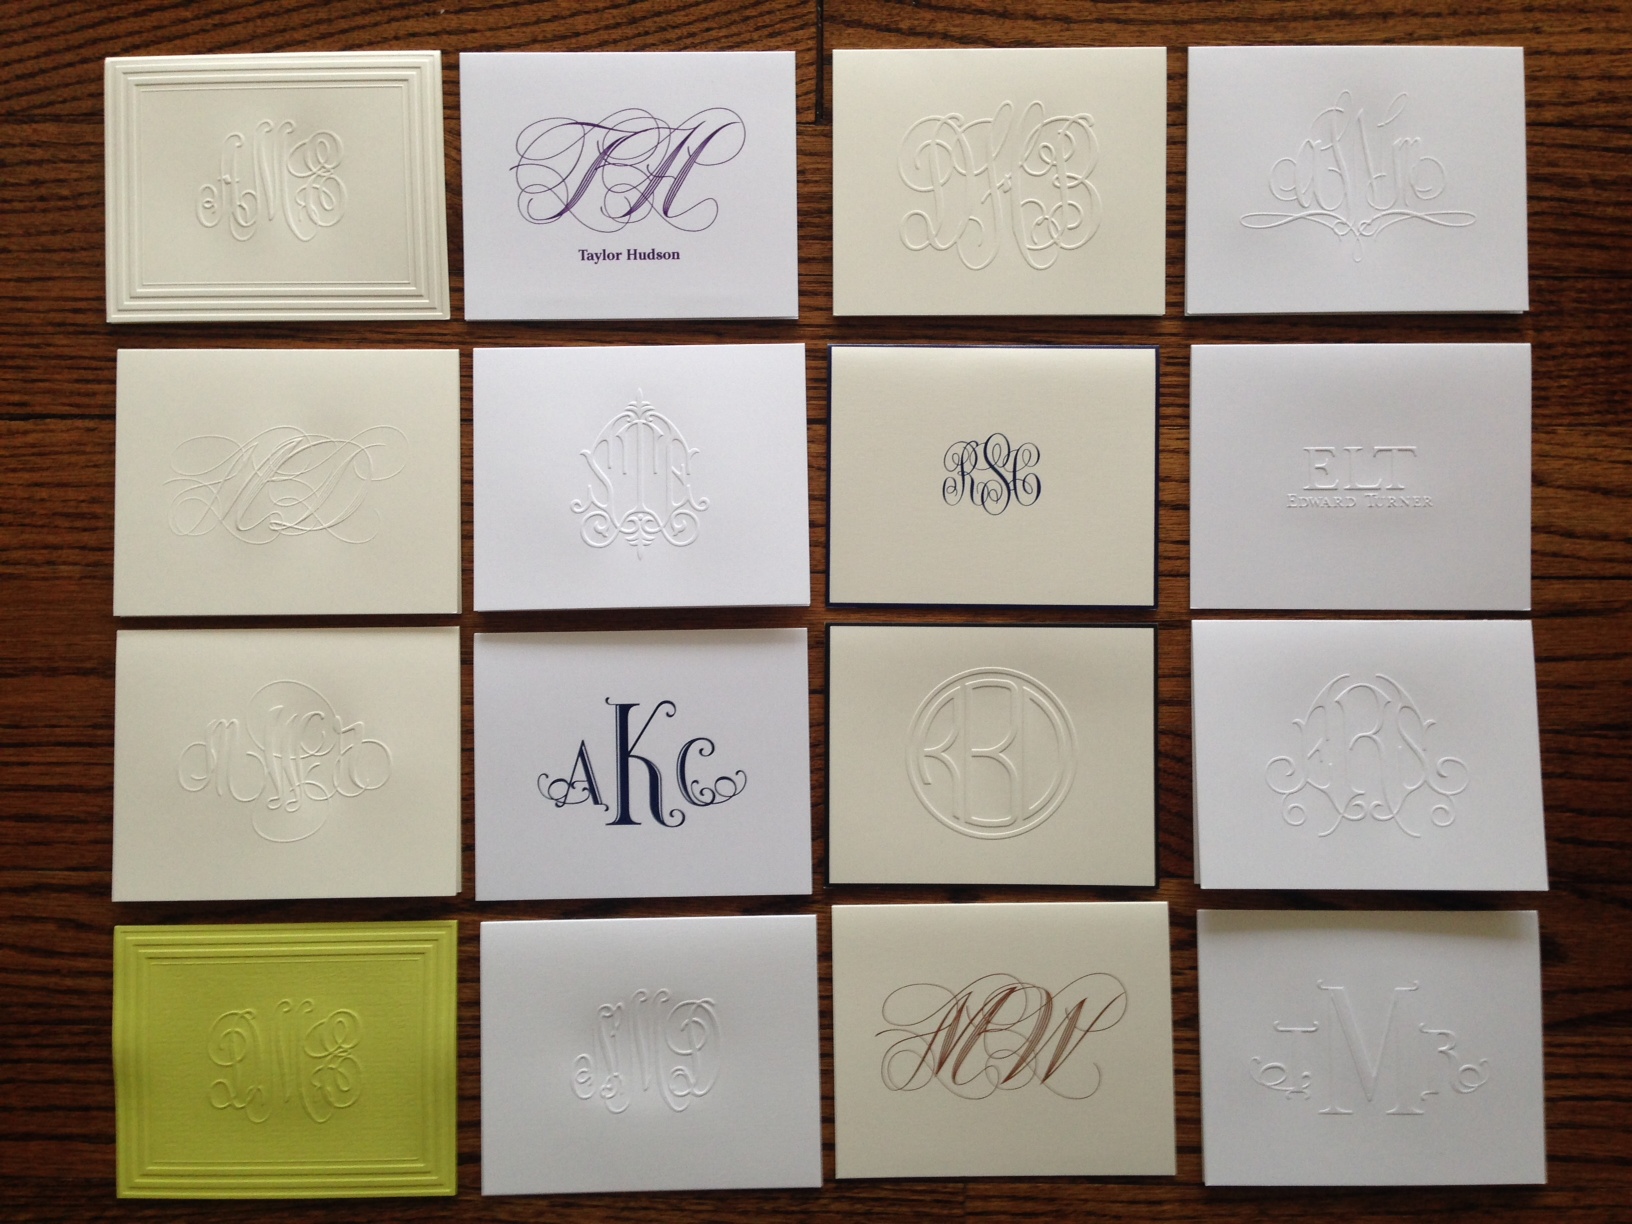 What is personalized stationery and how should I use it?